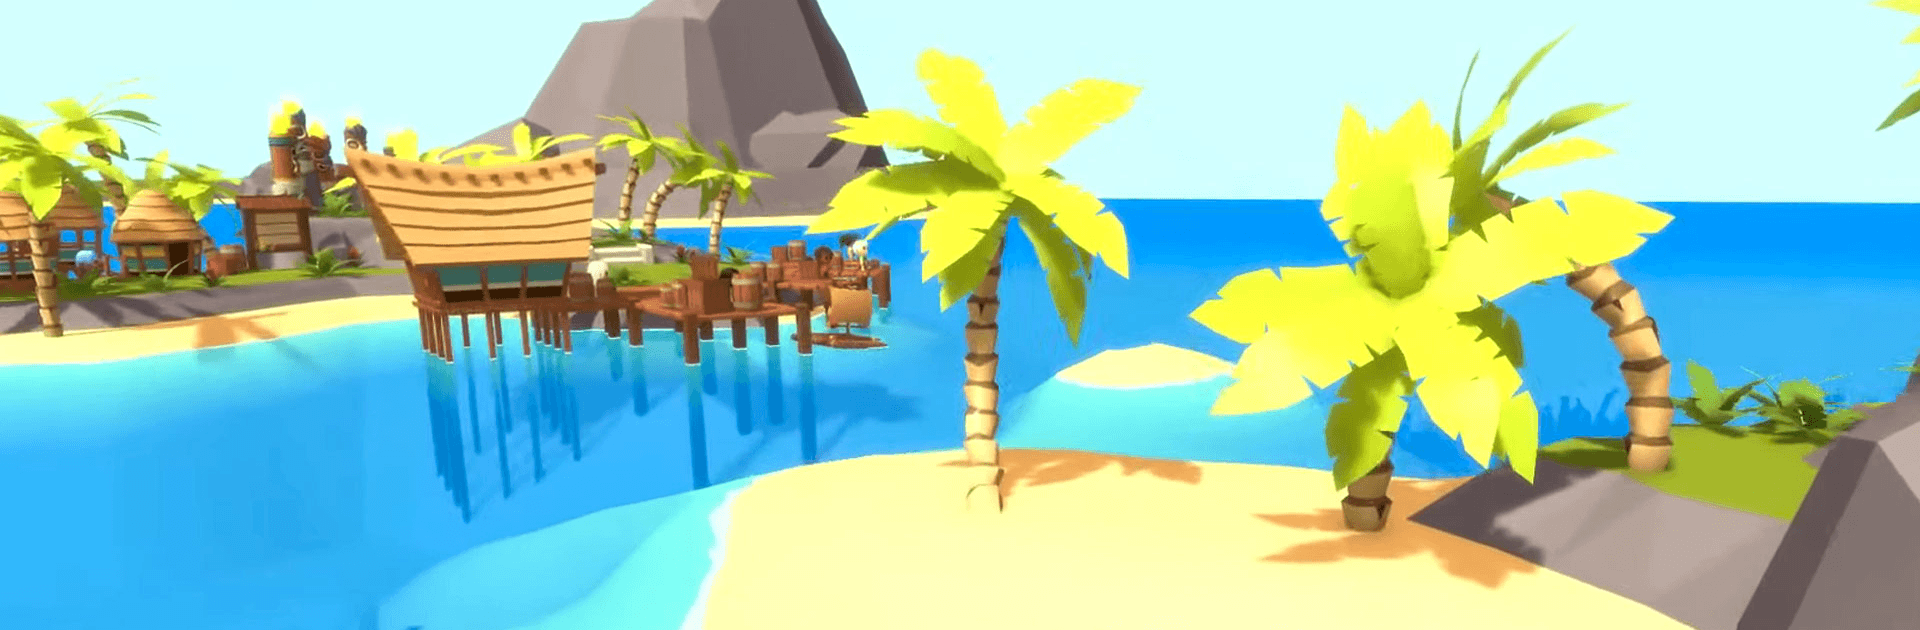 Tides: A Fishing Game